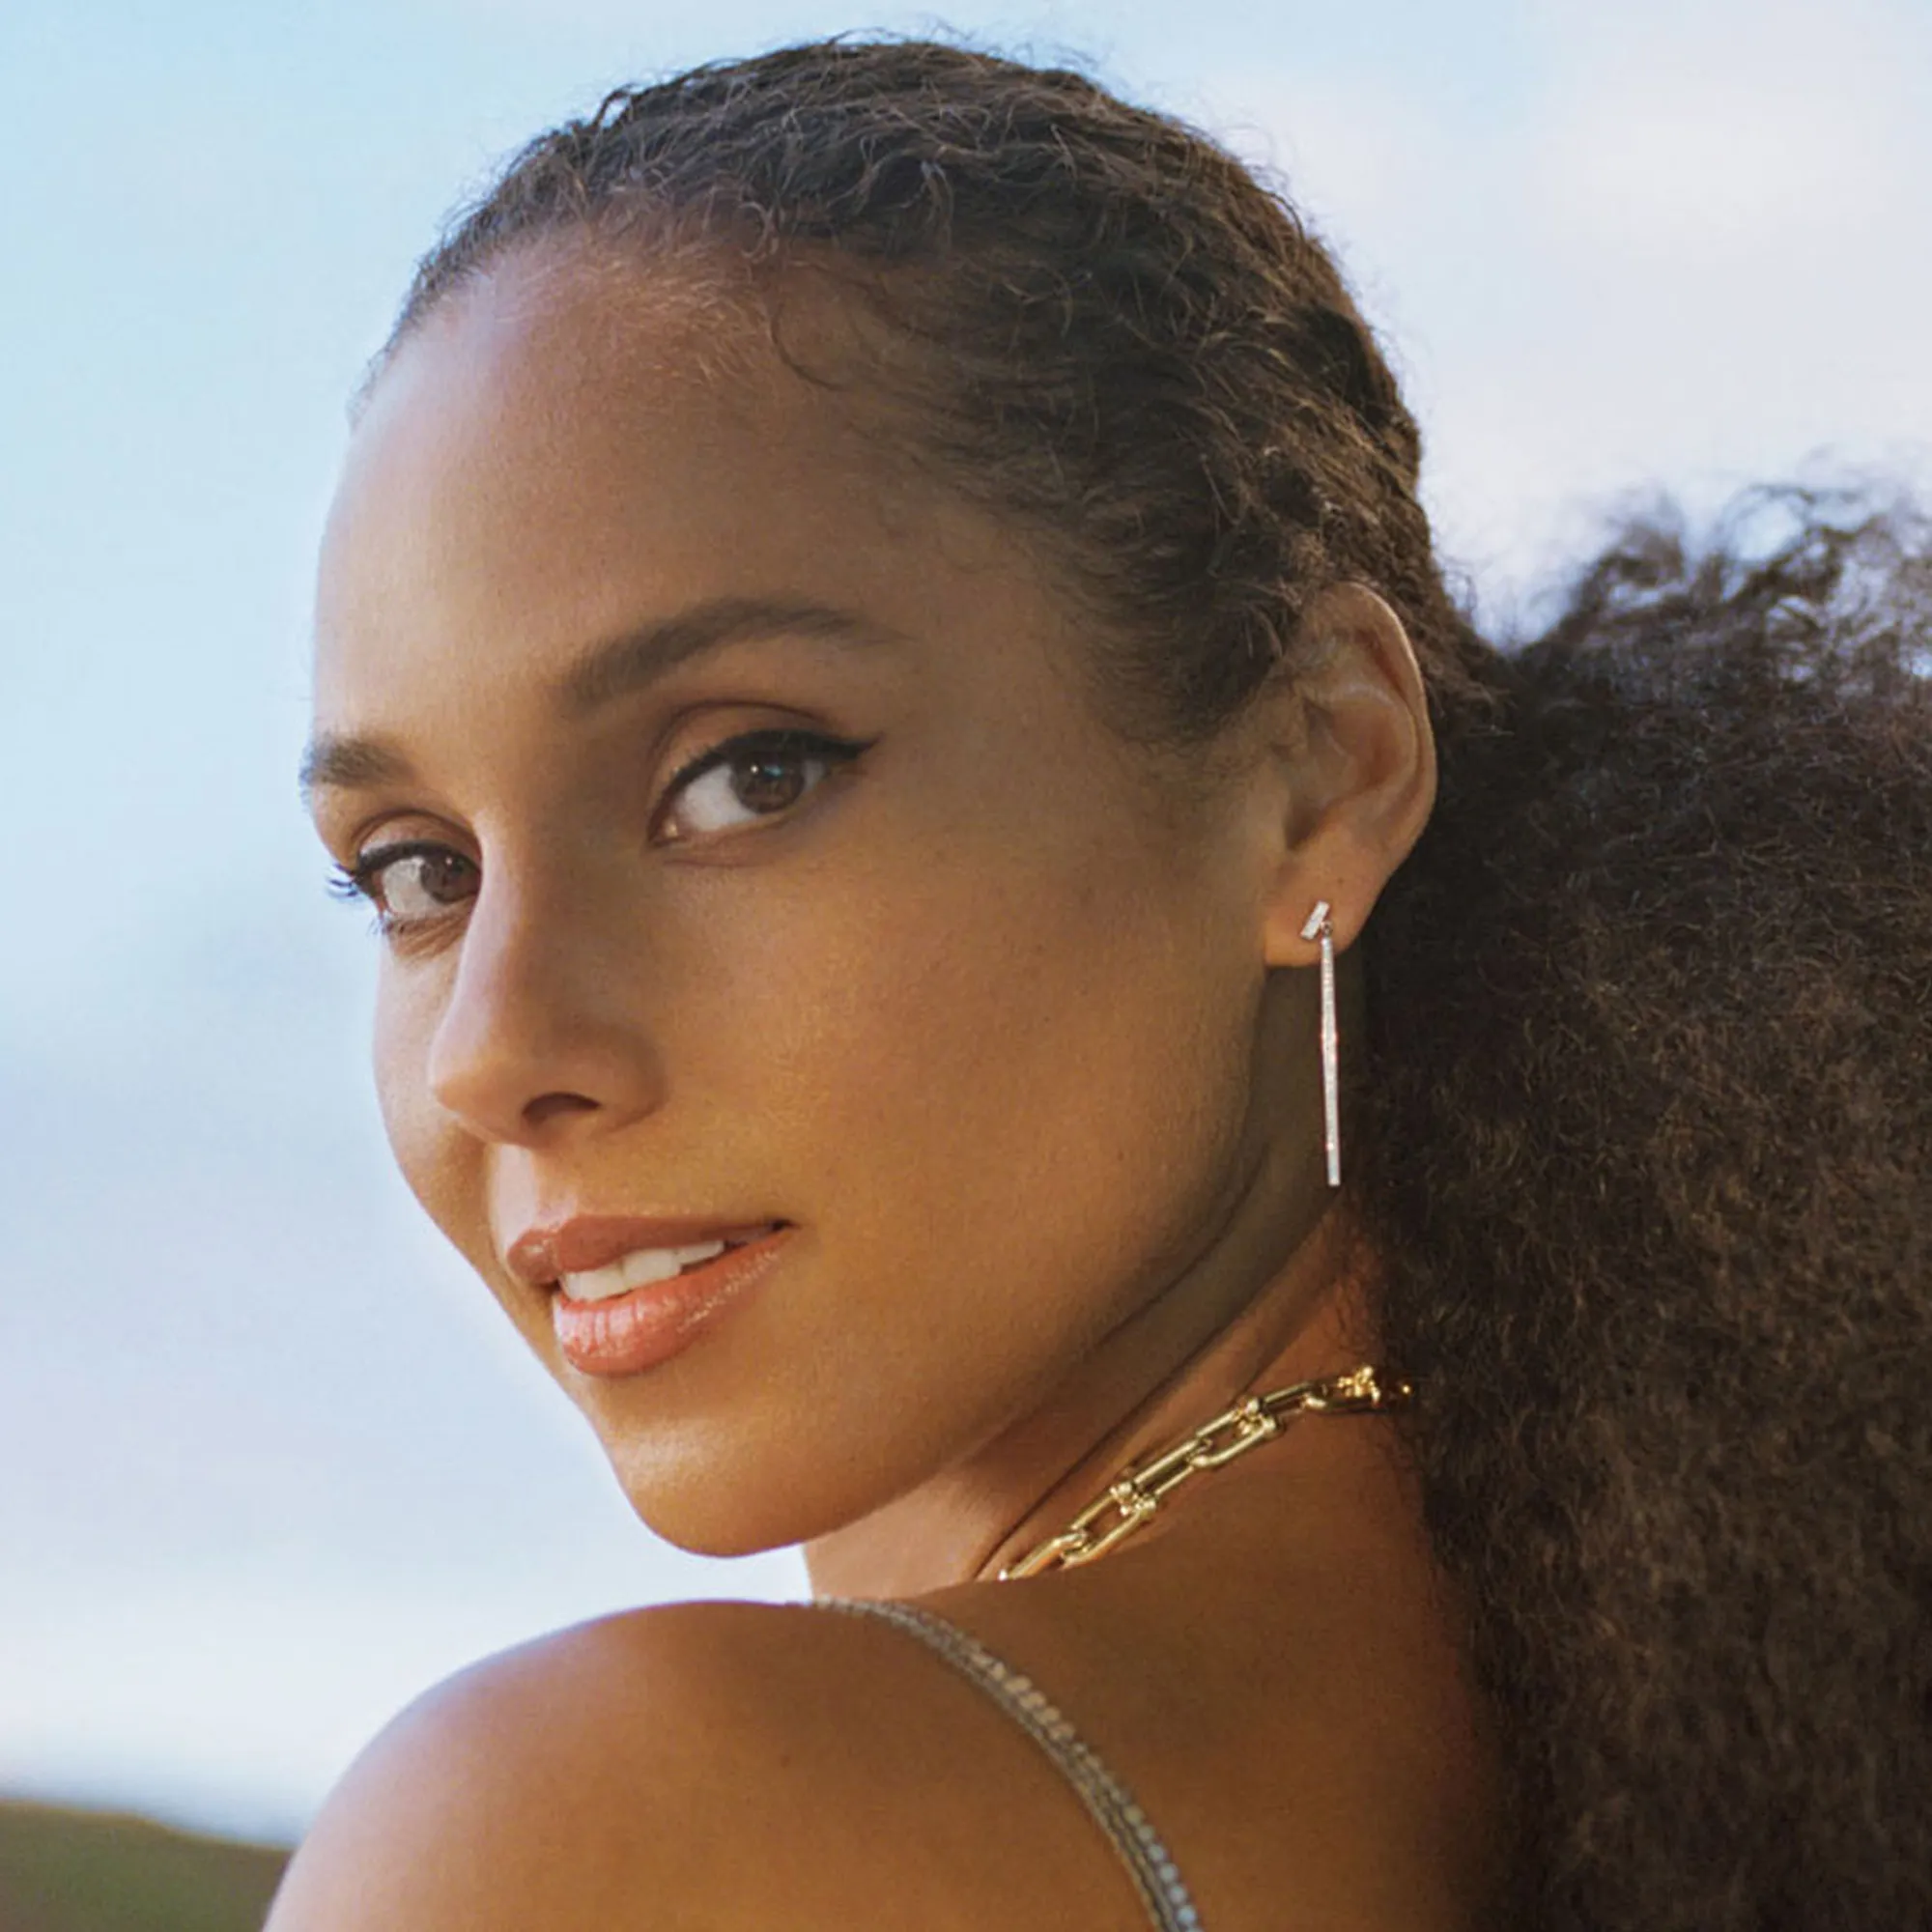 Alicia Keys: Biography, Age, and Music Career - The History